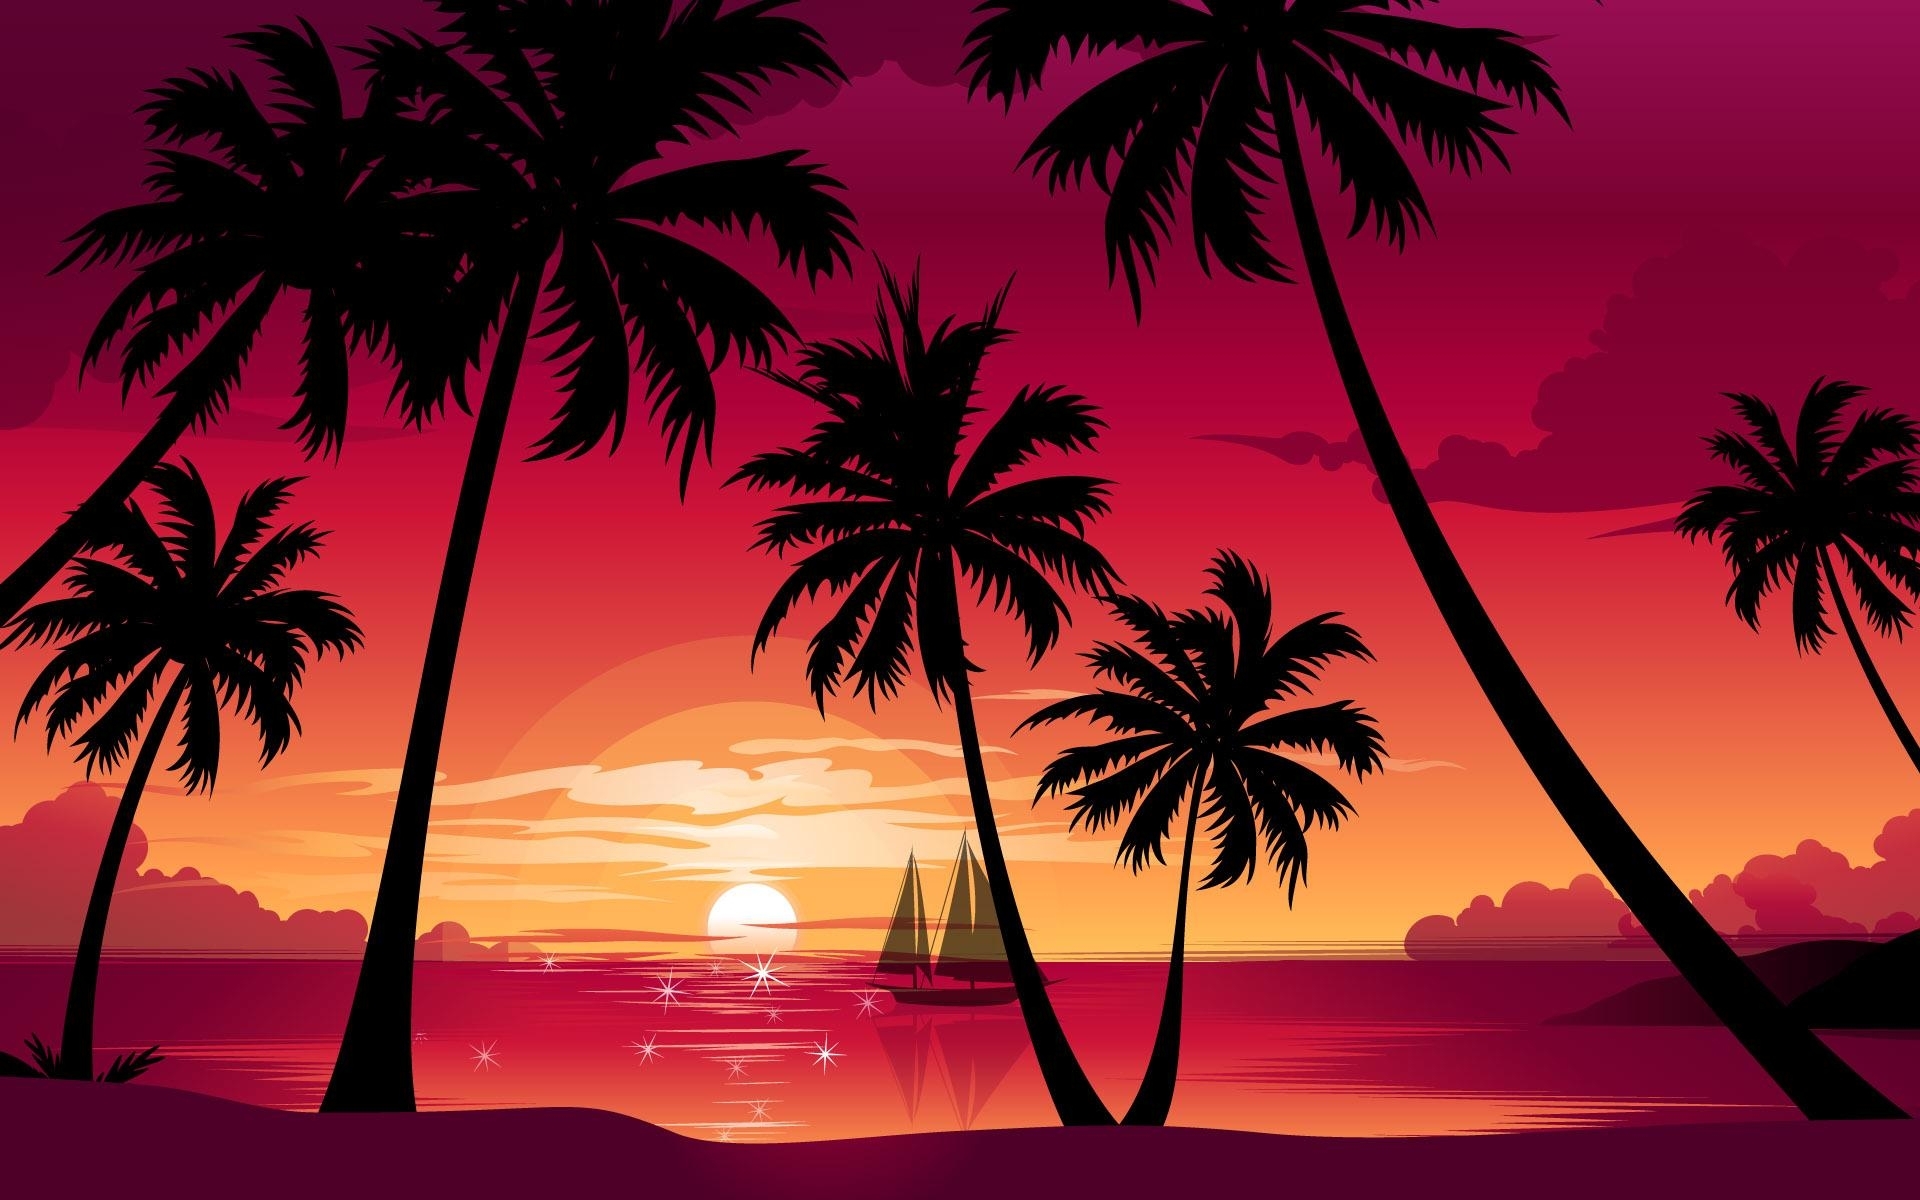 pictures, palms, sunset, red, landscape